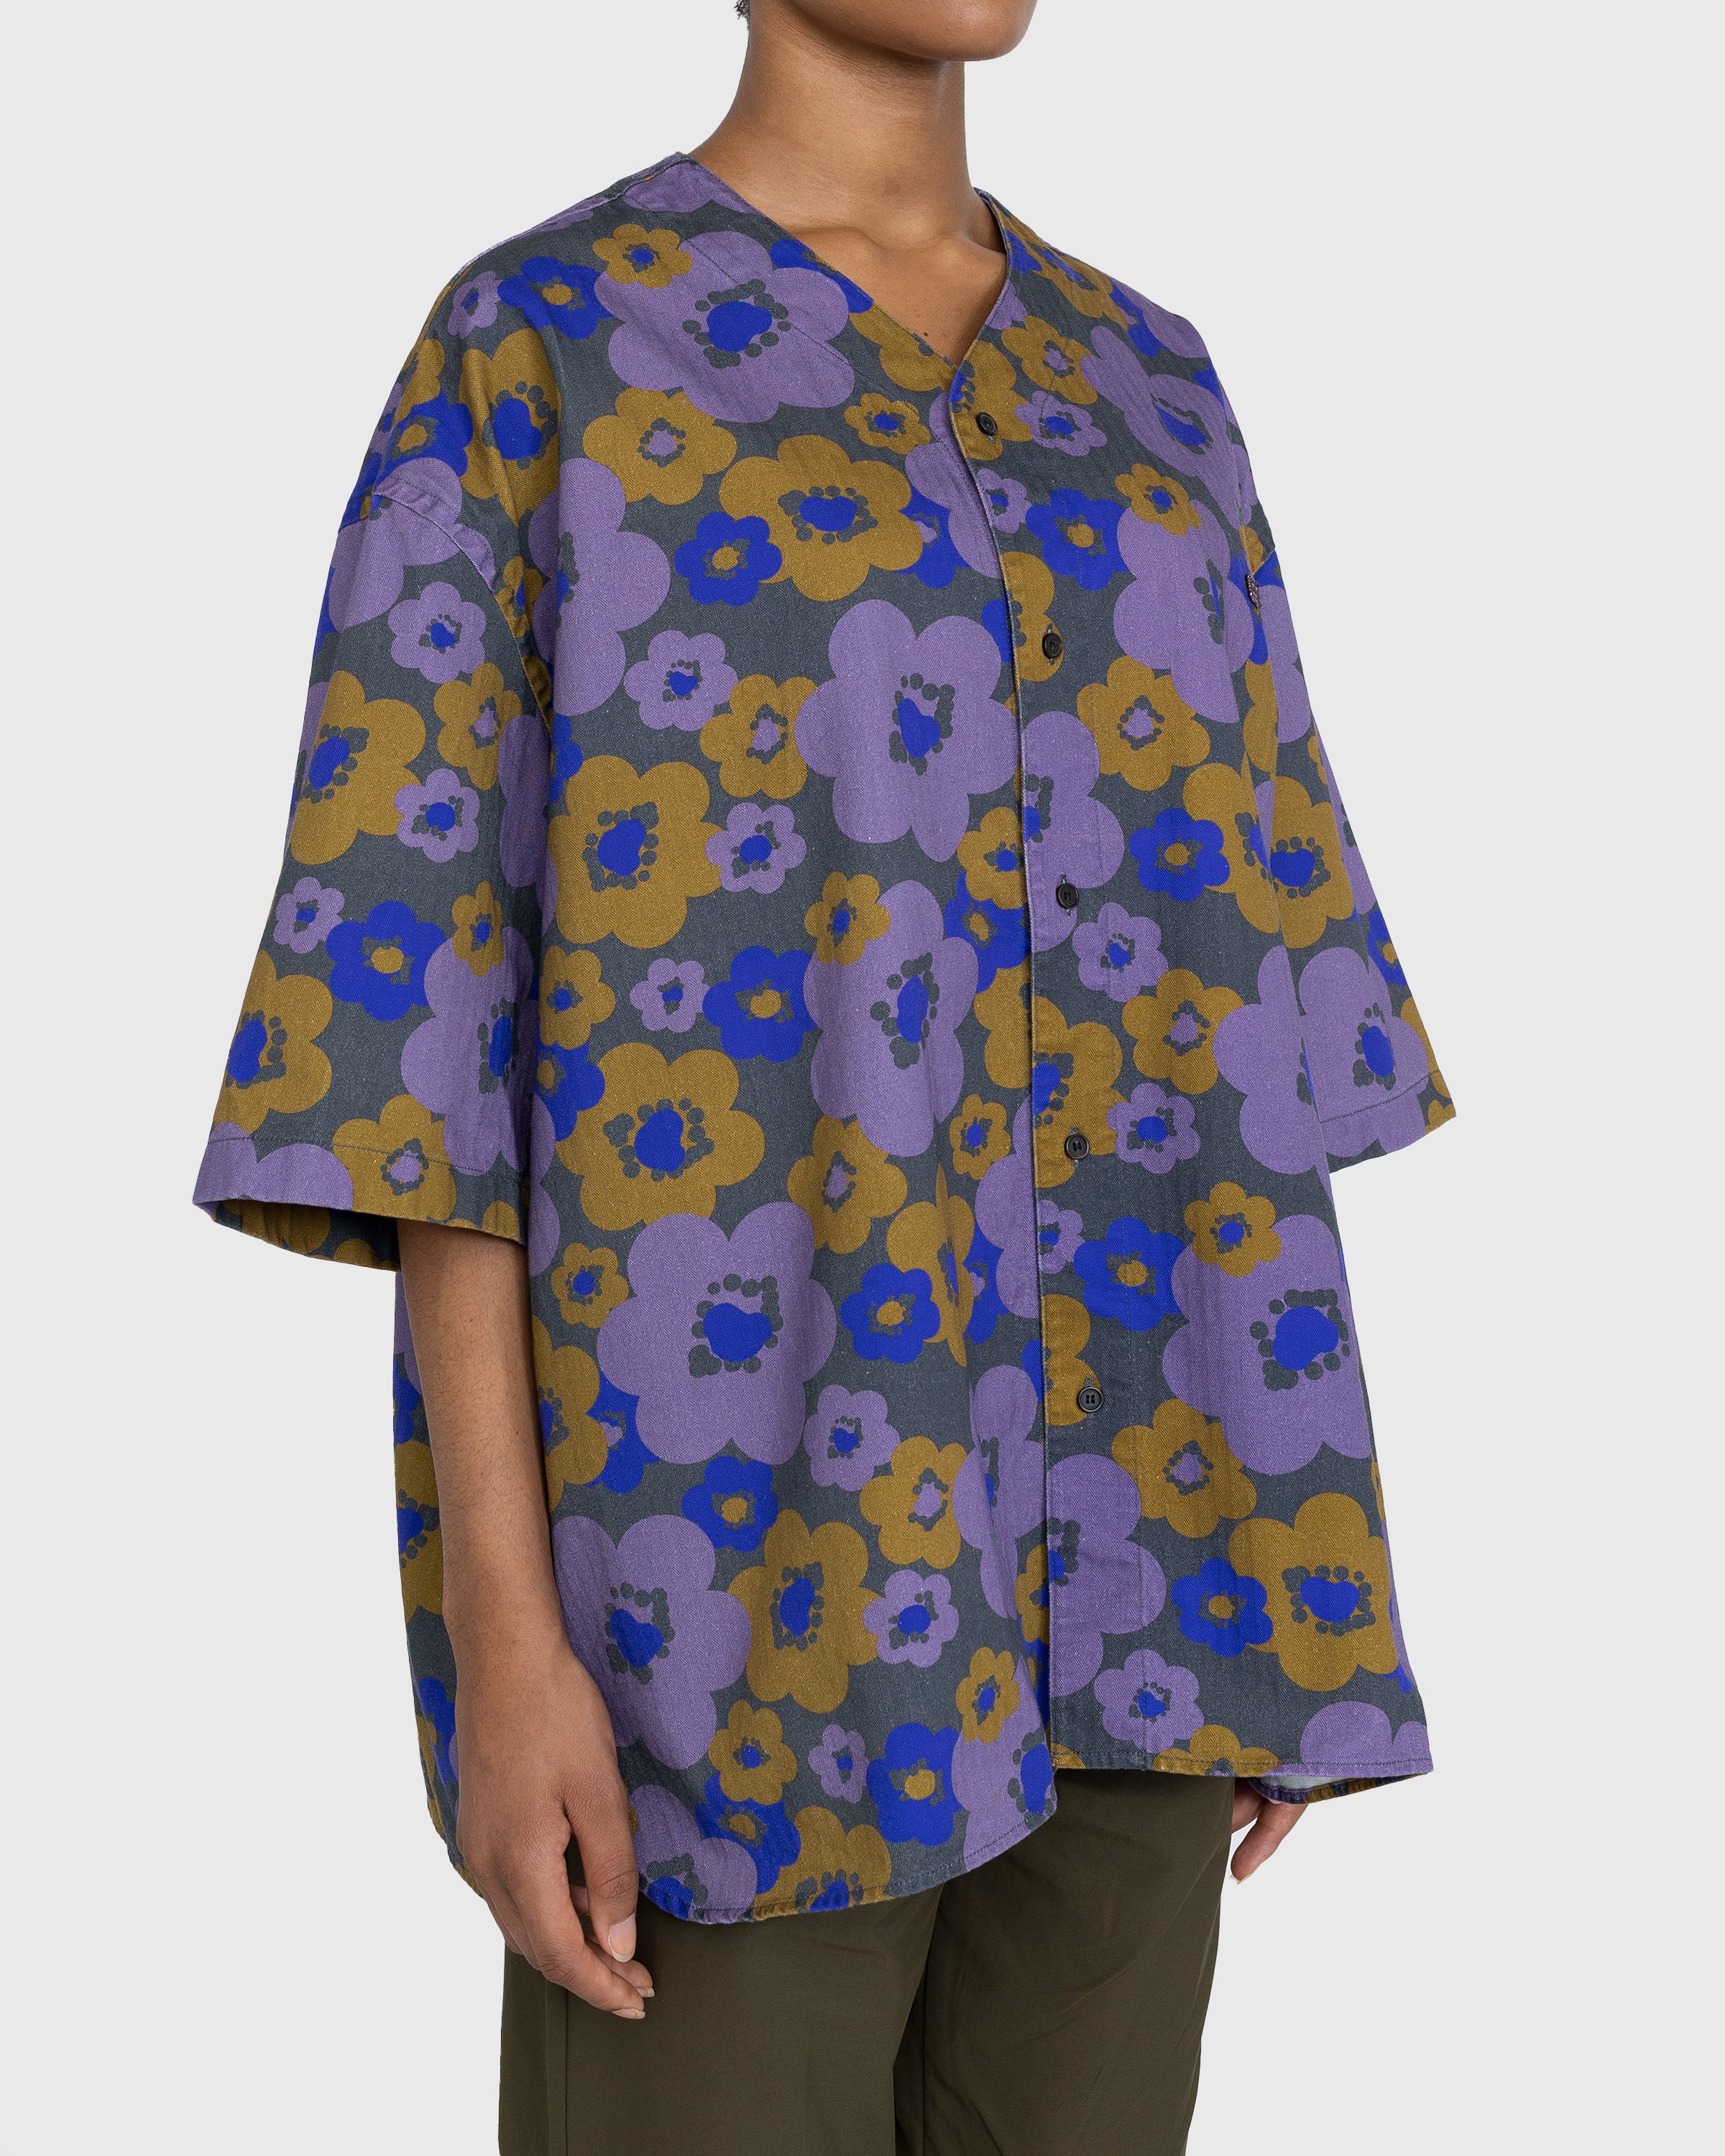 Acne Studios - Floral Short-Sleeve Button-Up Purple/Brown - Clothing - Multi - Image 3